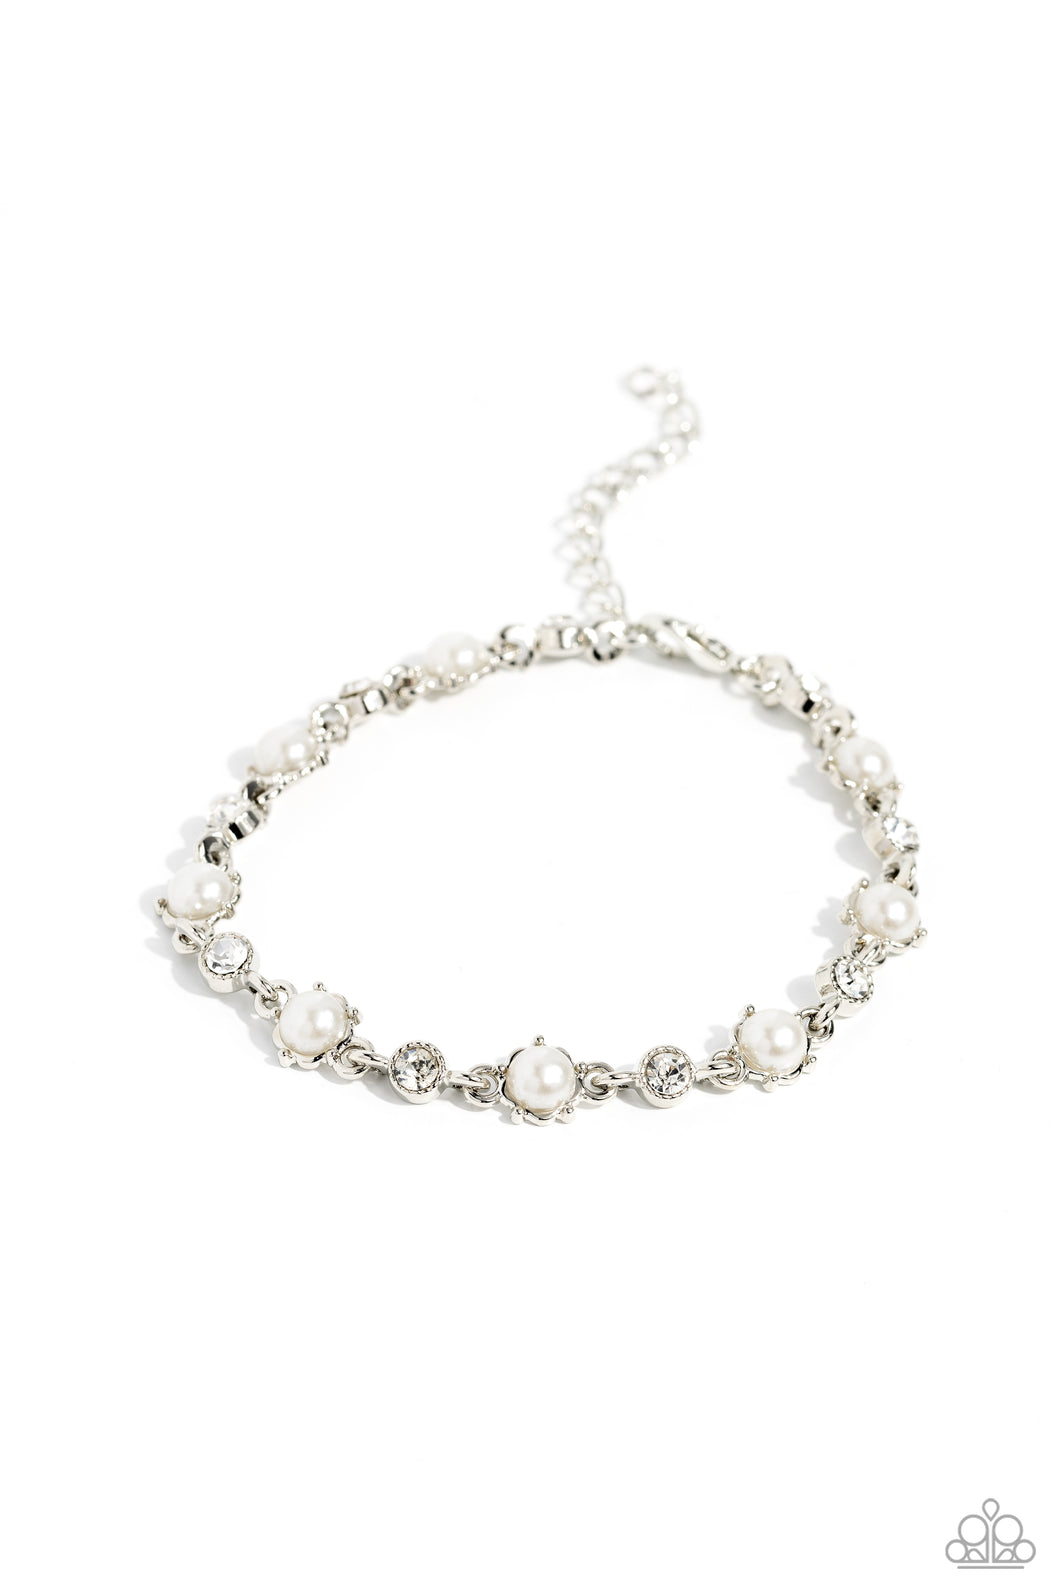 Particularly Pronged - White (Pearl and Gem) Bracelet